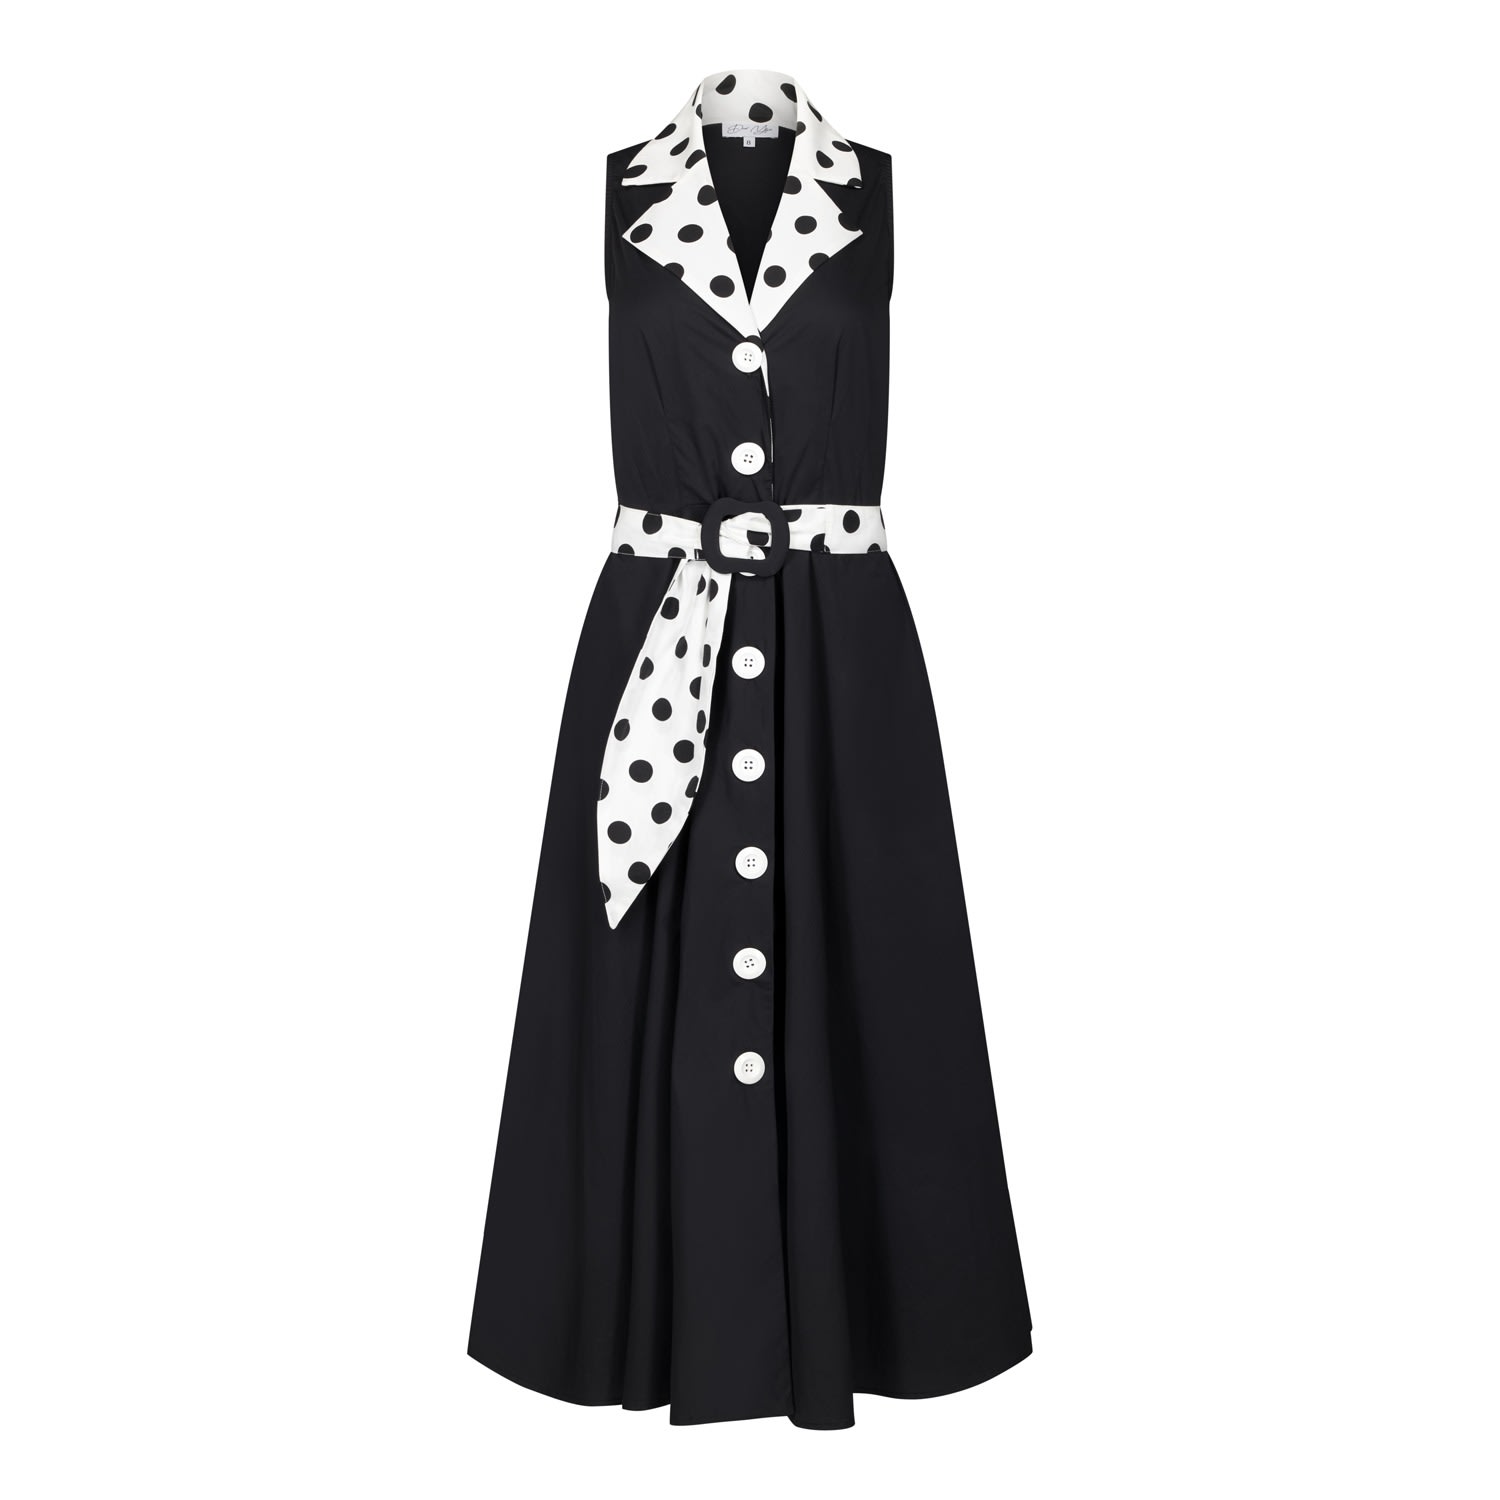 Shop Deer You Women's Adelaide Alluring Midi Dress In Black With White & Black Polka Dots